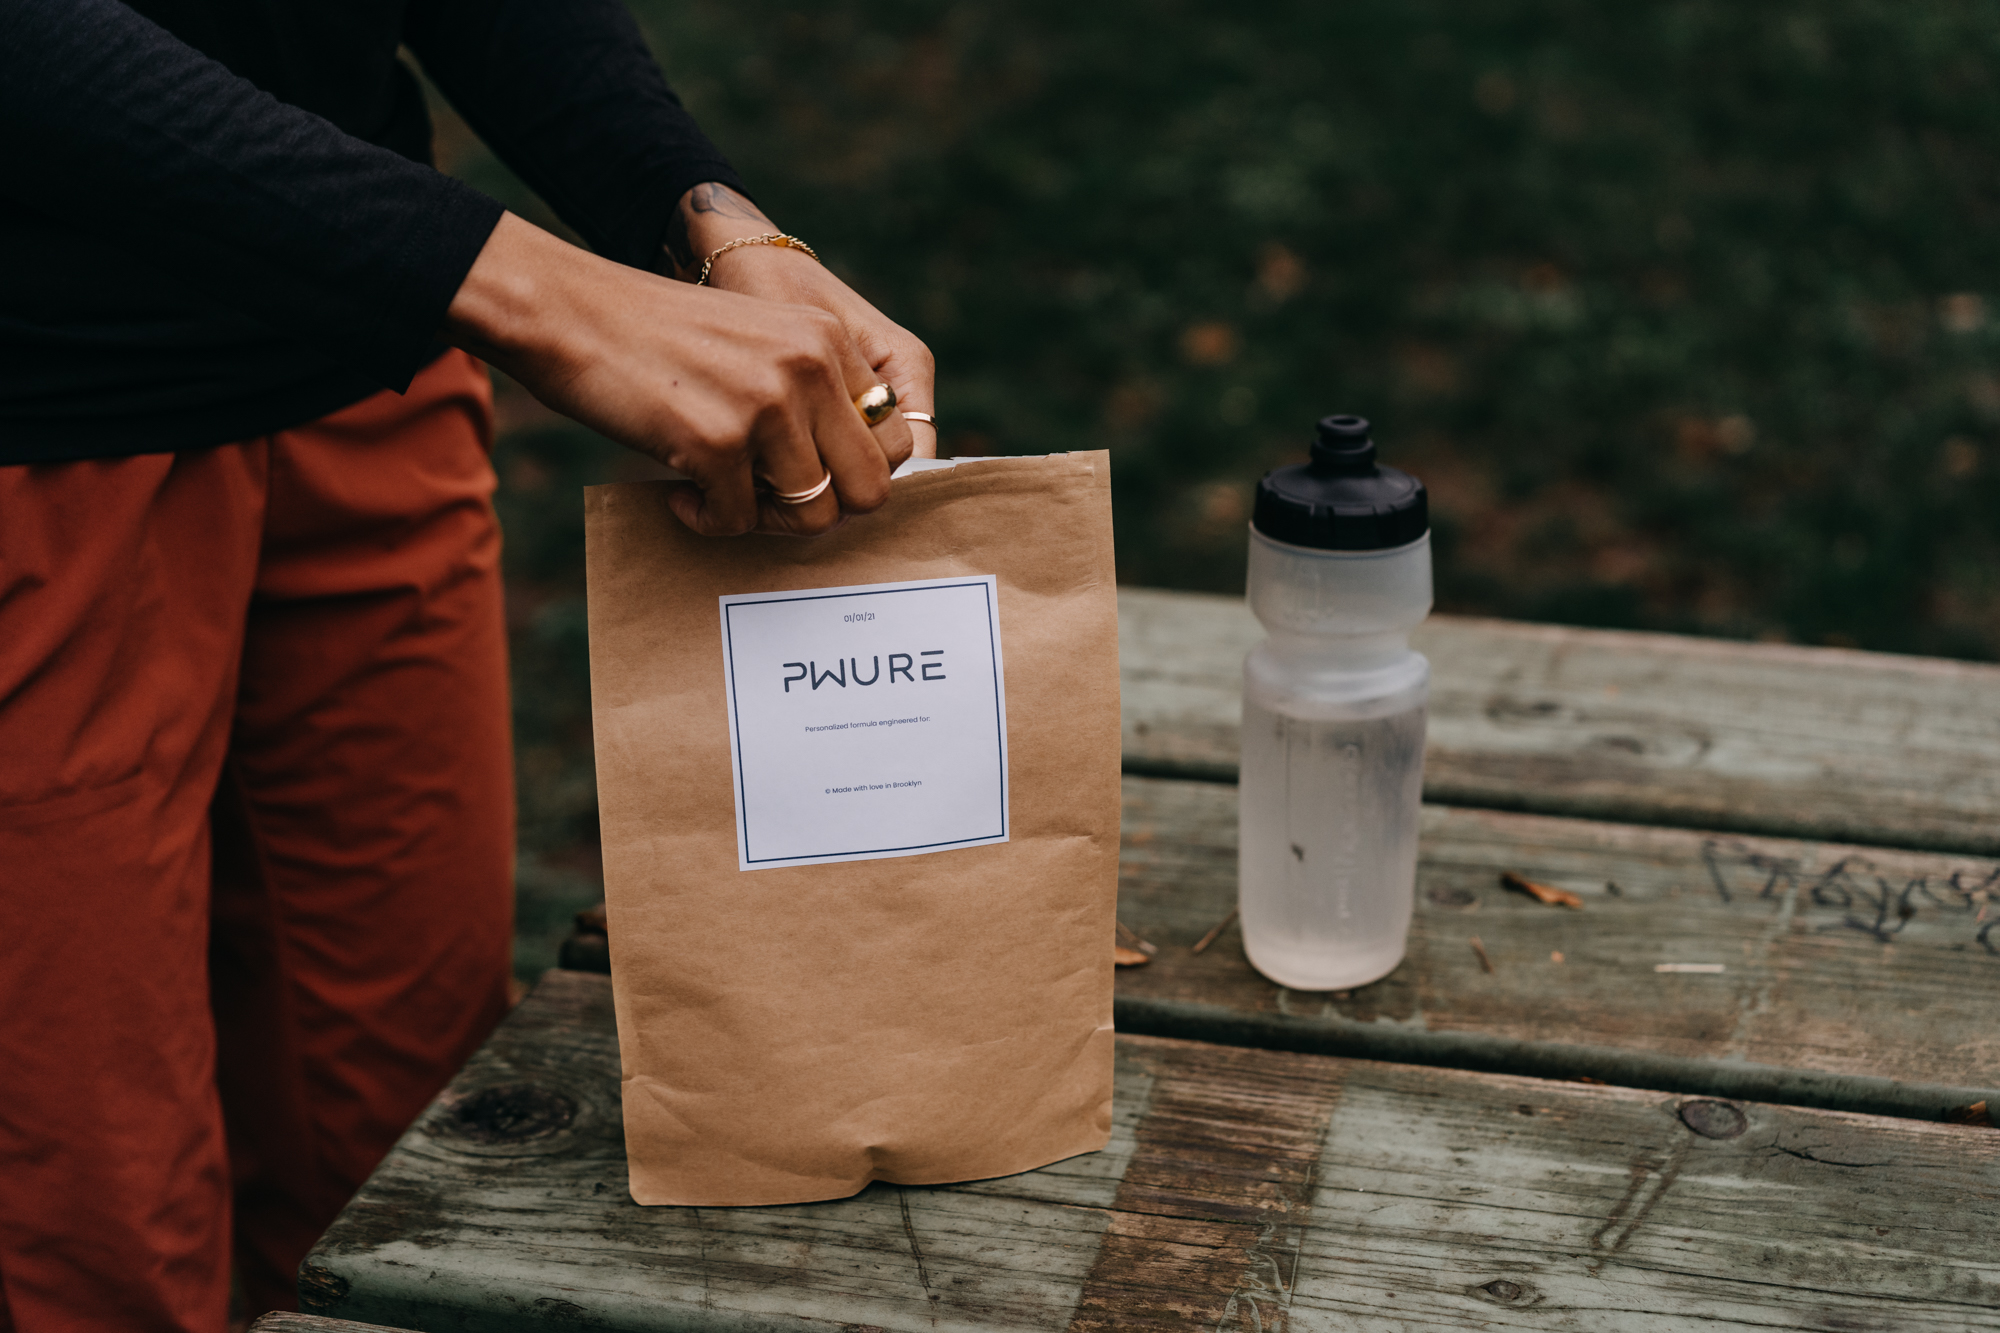 Pwure, the personalized, data-based sports nutrition company,  welcomes top long distance runners - Emily Sisson, Scott Fauble and Noah Droddy - as its newest investors and athlete brand ambassadors